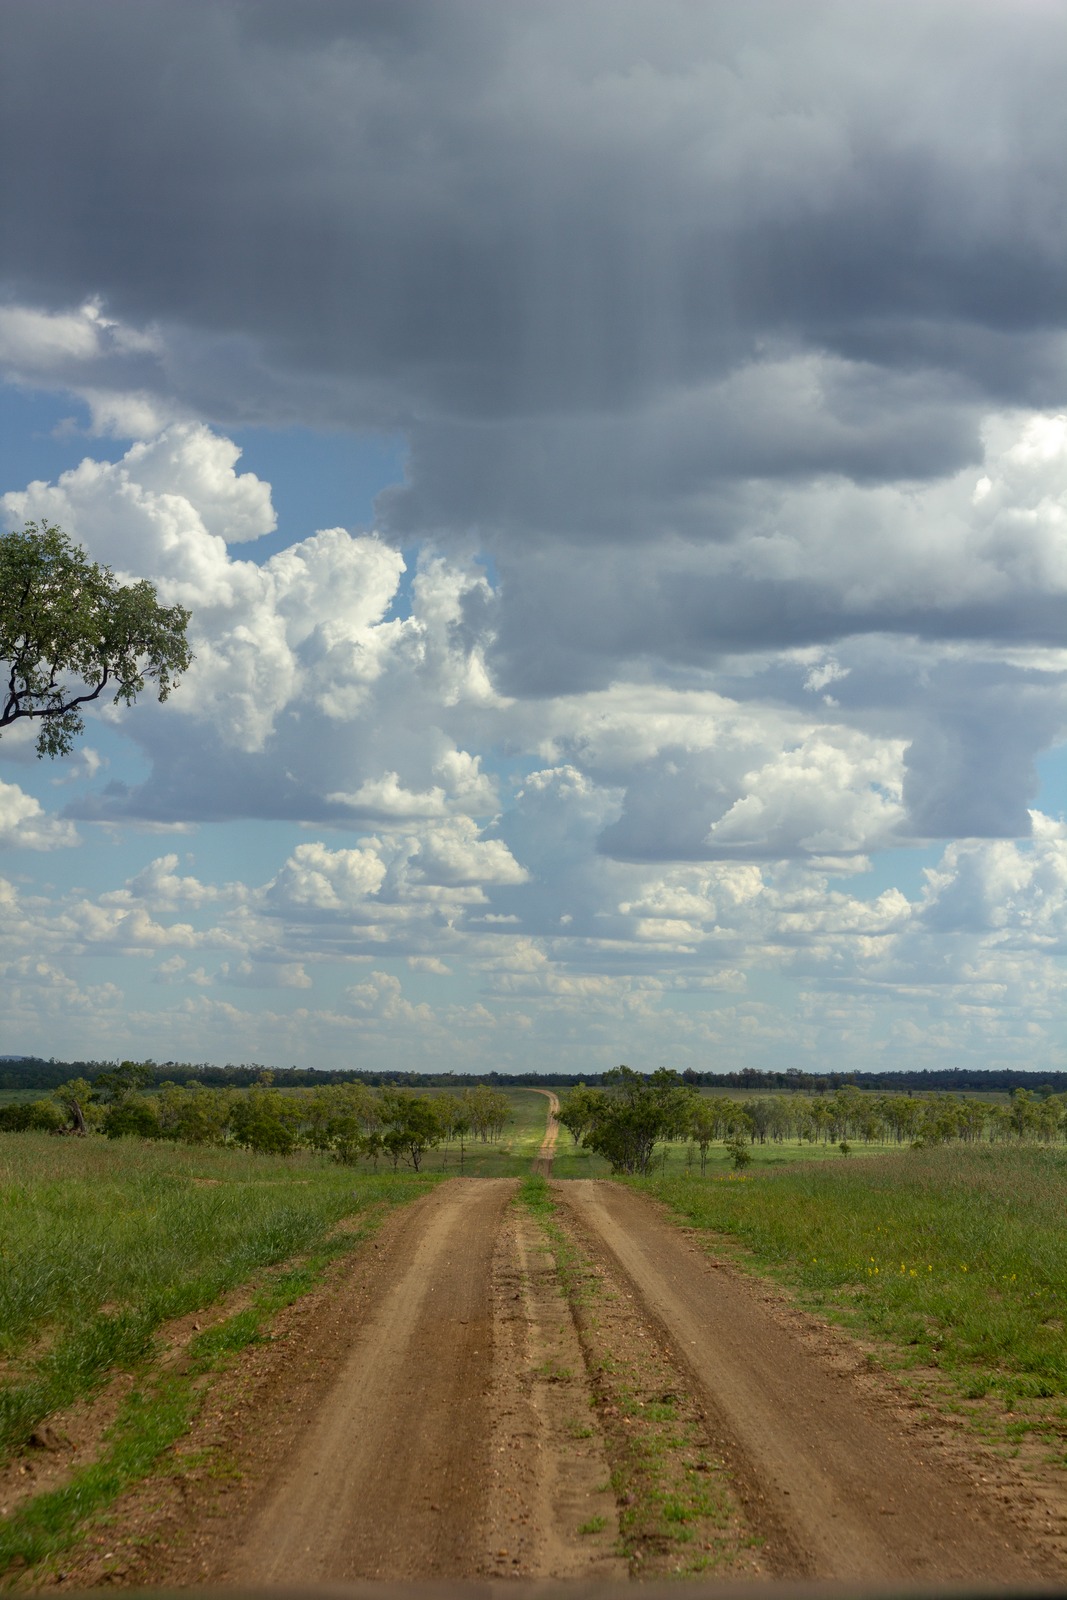 View of dirt road through green pastures and trees, clouds in the sky. 